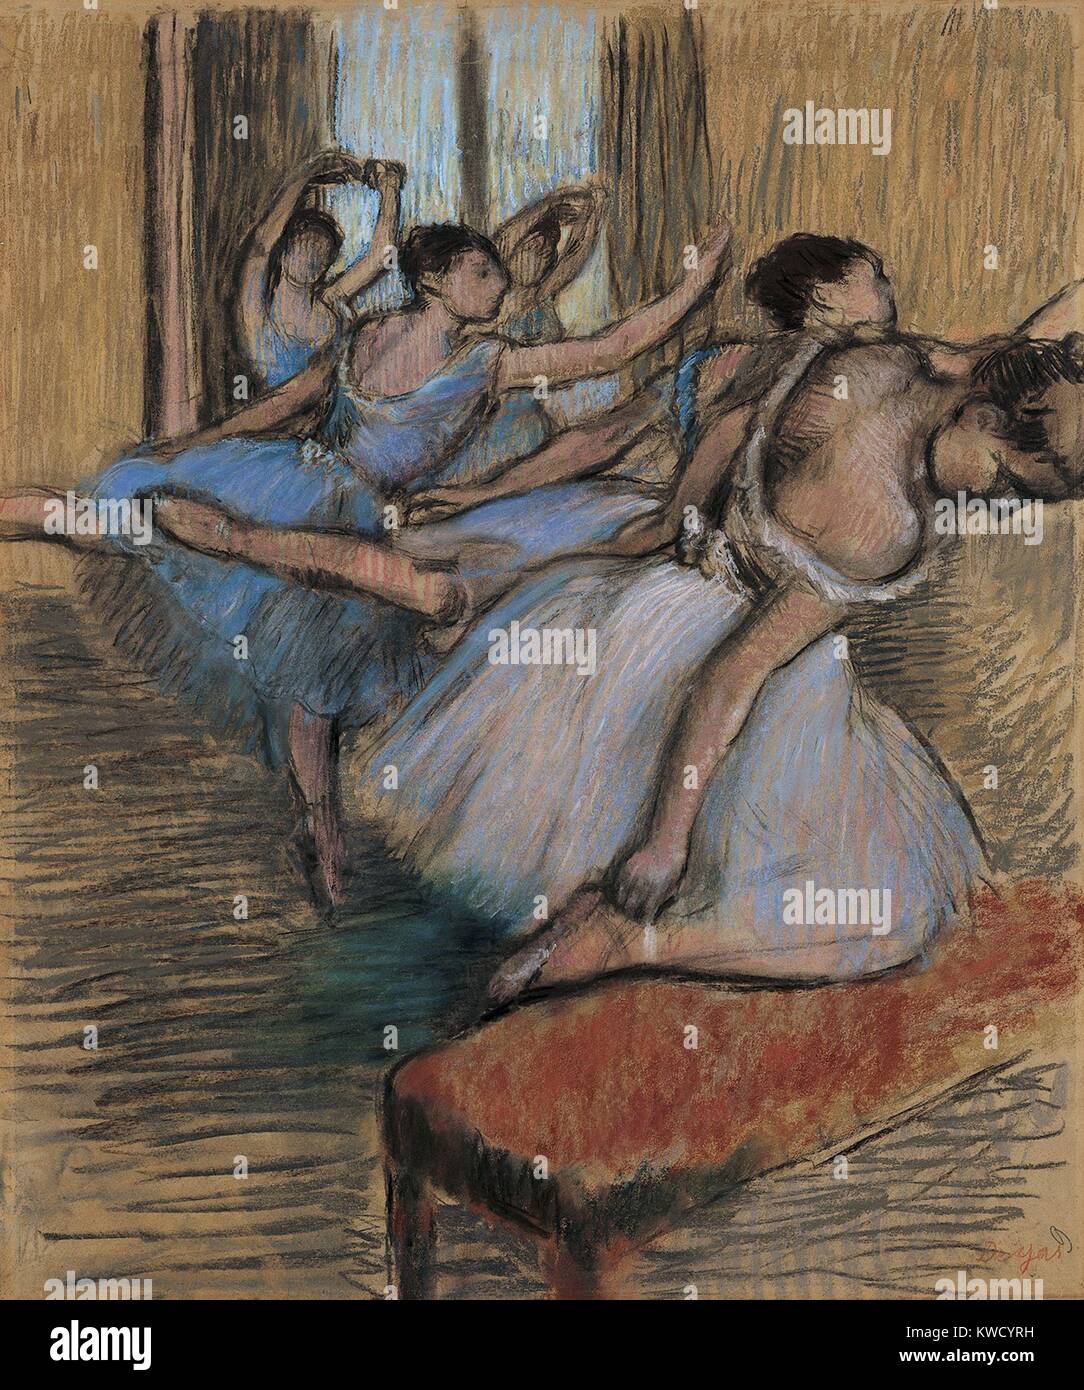 The Dancers, by Edgar Degas, 1900, French impressionist drawing, pastel and charcoal on paper. Degas told art dealer Ambroise Vollard, for me the dance is a pretext for painting pretty costumes and rendering movement (BSLOC 2017 3 111) Stock Photo